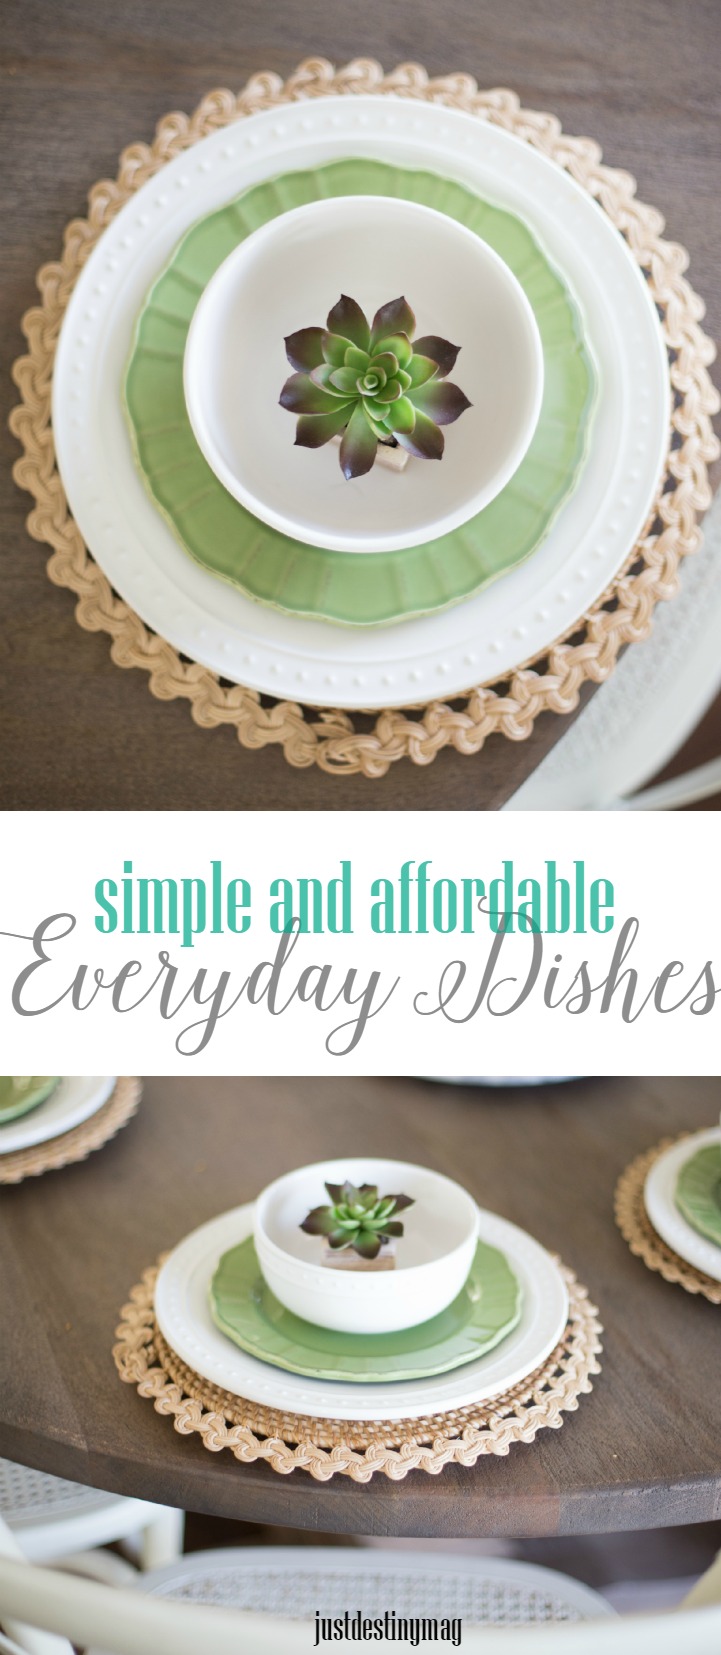 Simple and Affordable Everyday Dishes